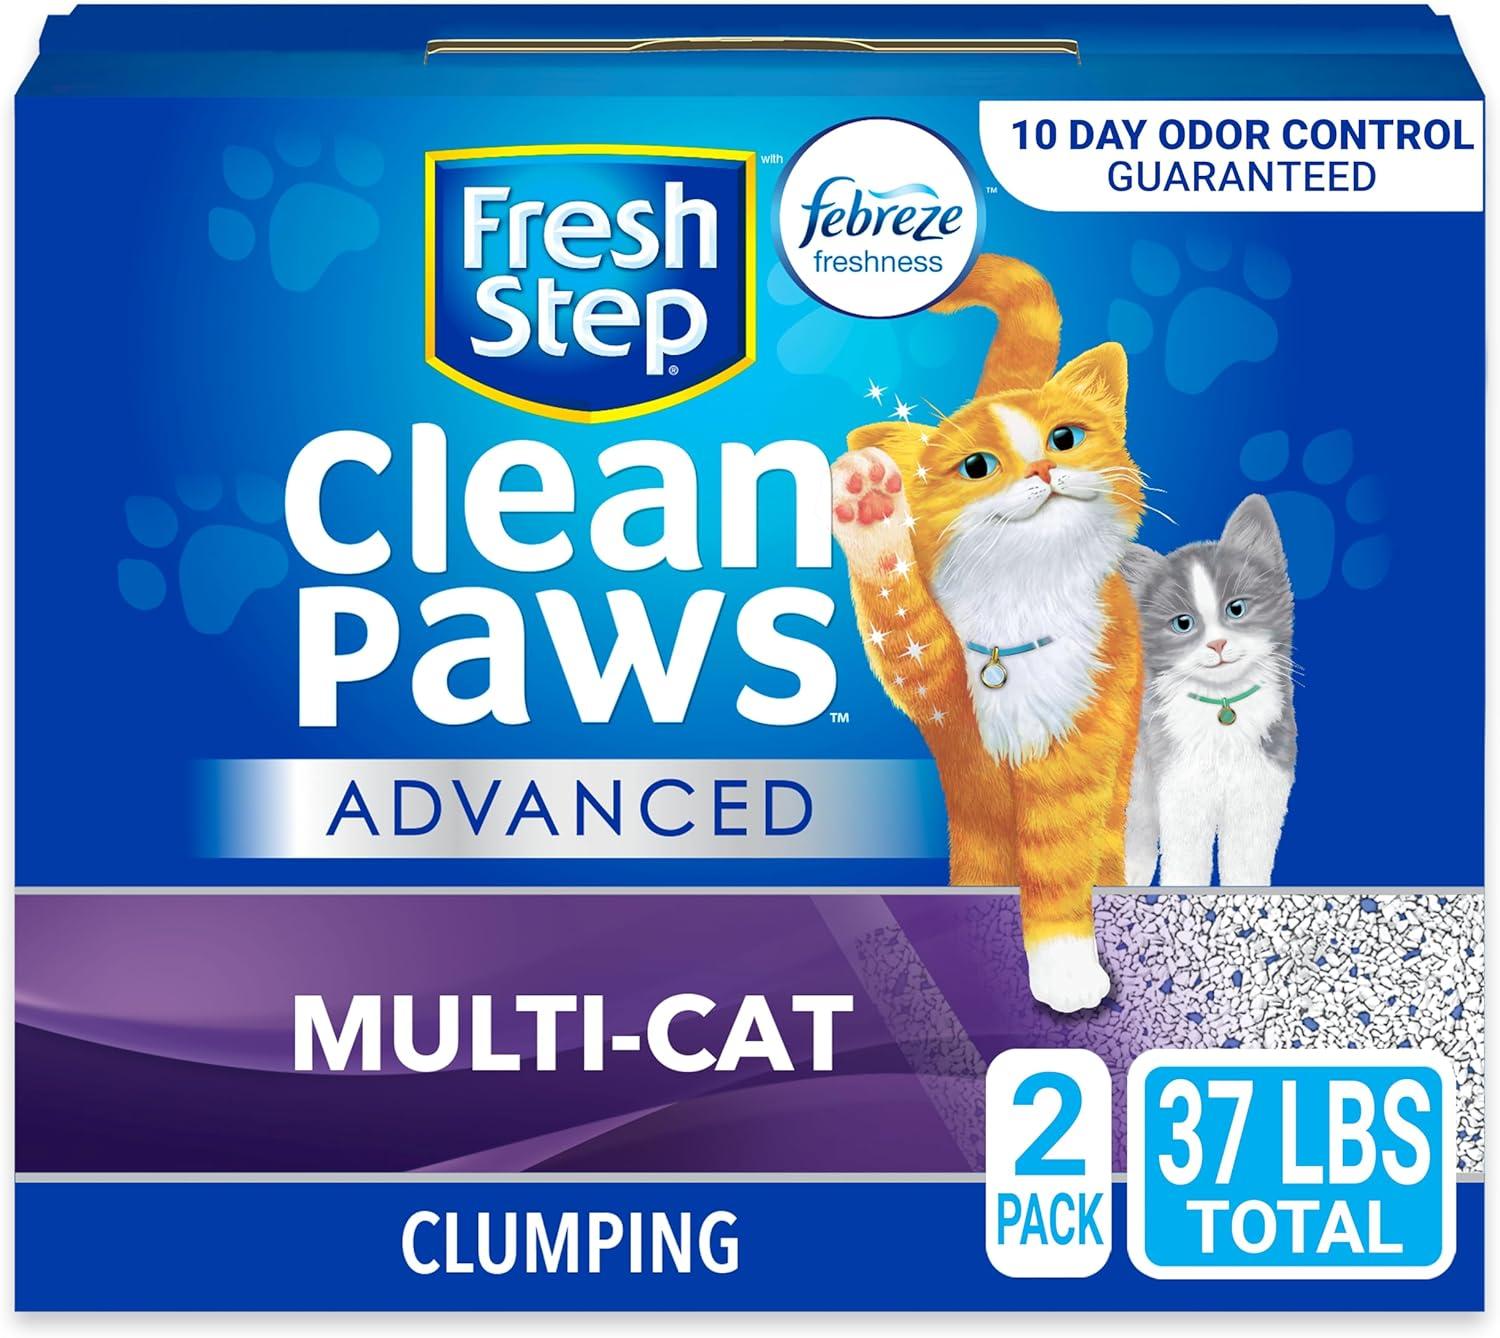 Fresh Step Clumping Cat Litter Advanced 37lbs for $15.79